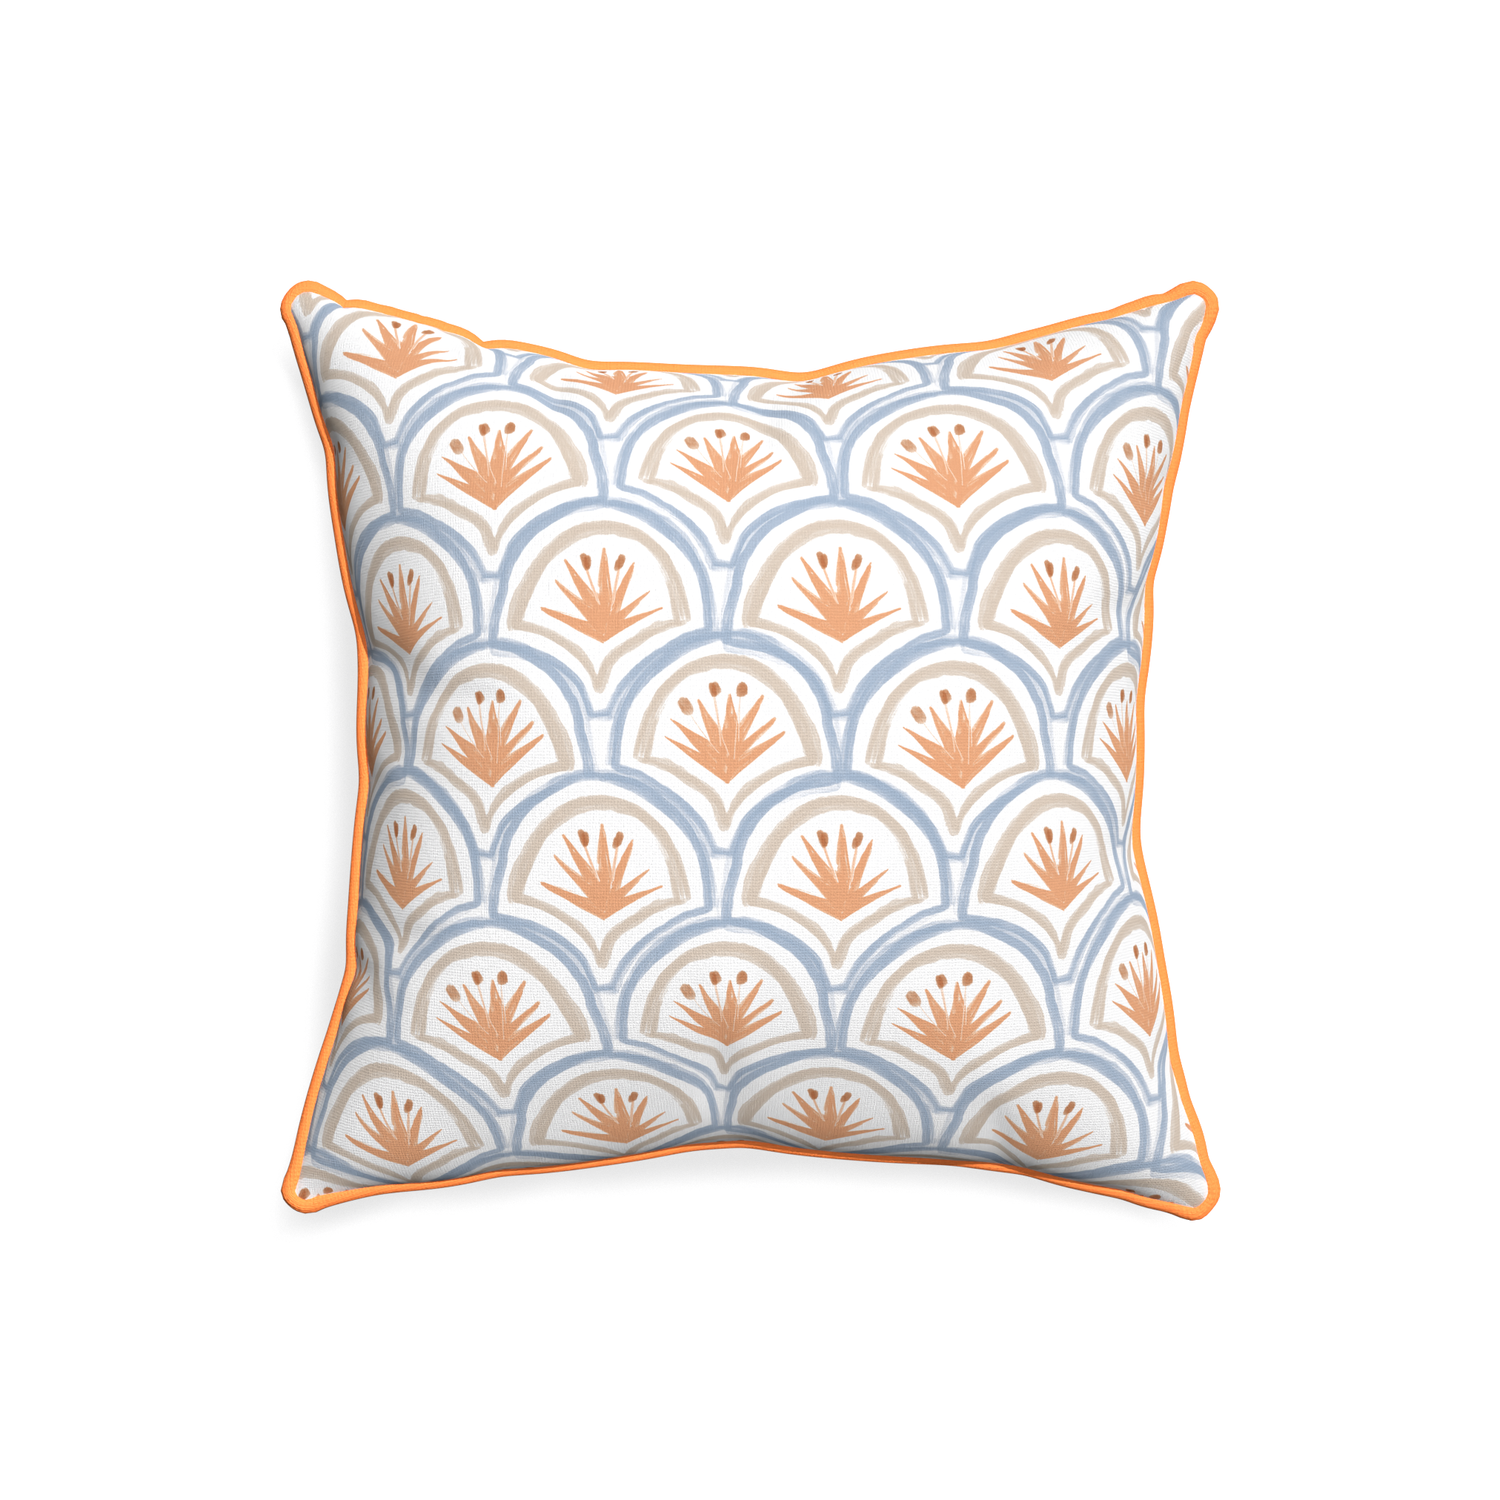 20-square thatcher apricot custom pillow with clementine piping on white background